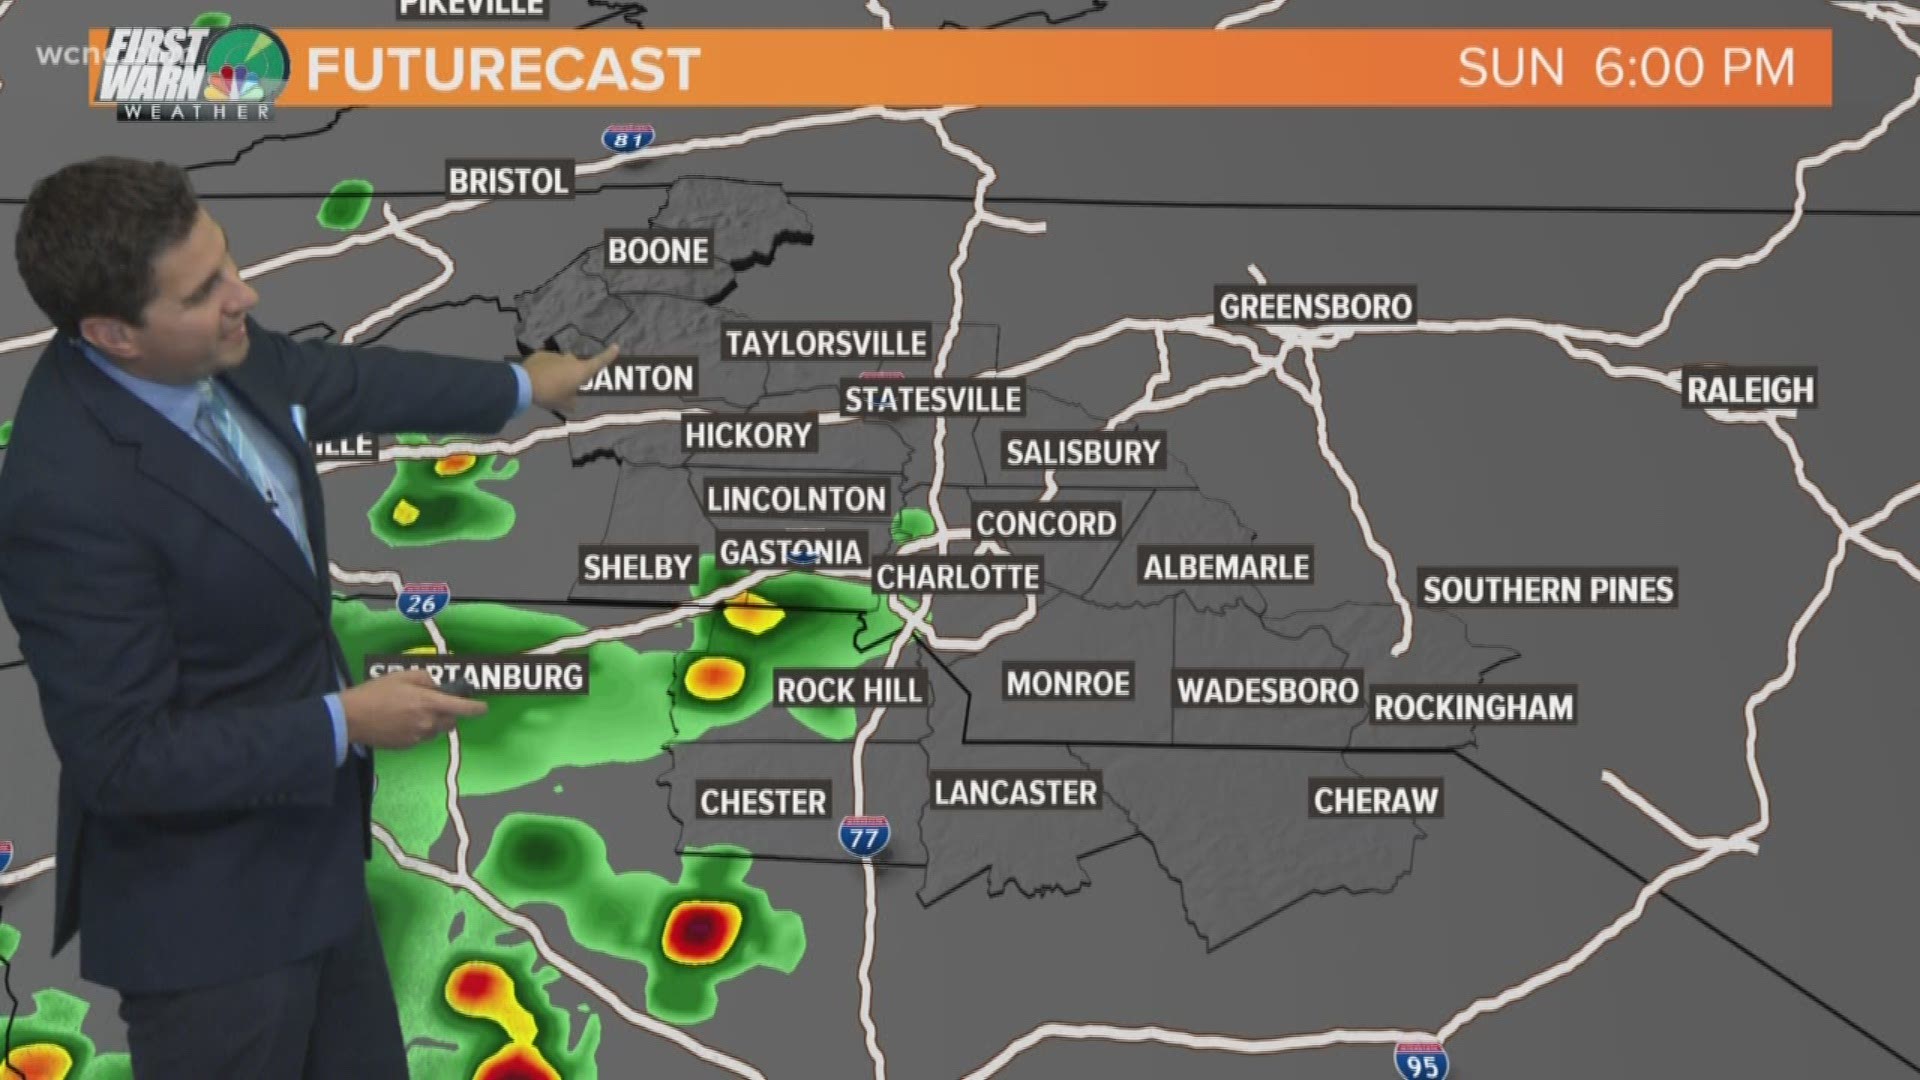 Scattered showers and storms are possible mainly west and southwest of Charlotte later this afternoon!